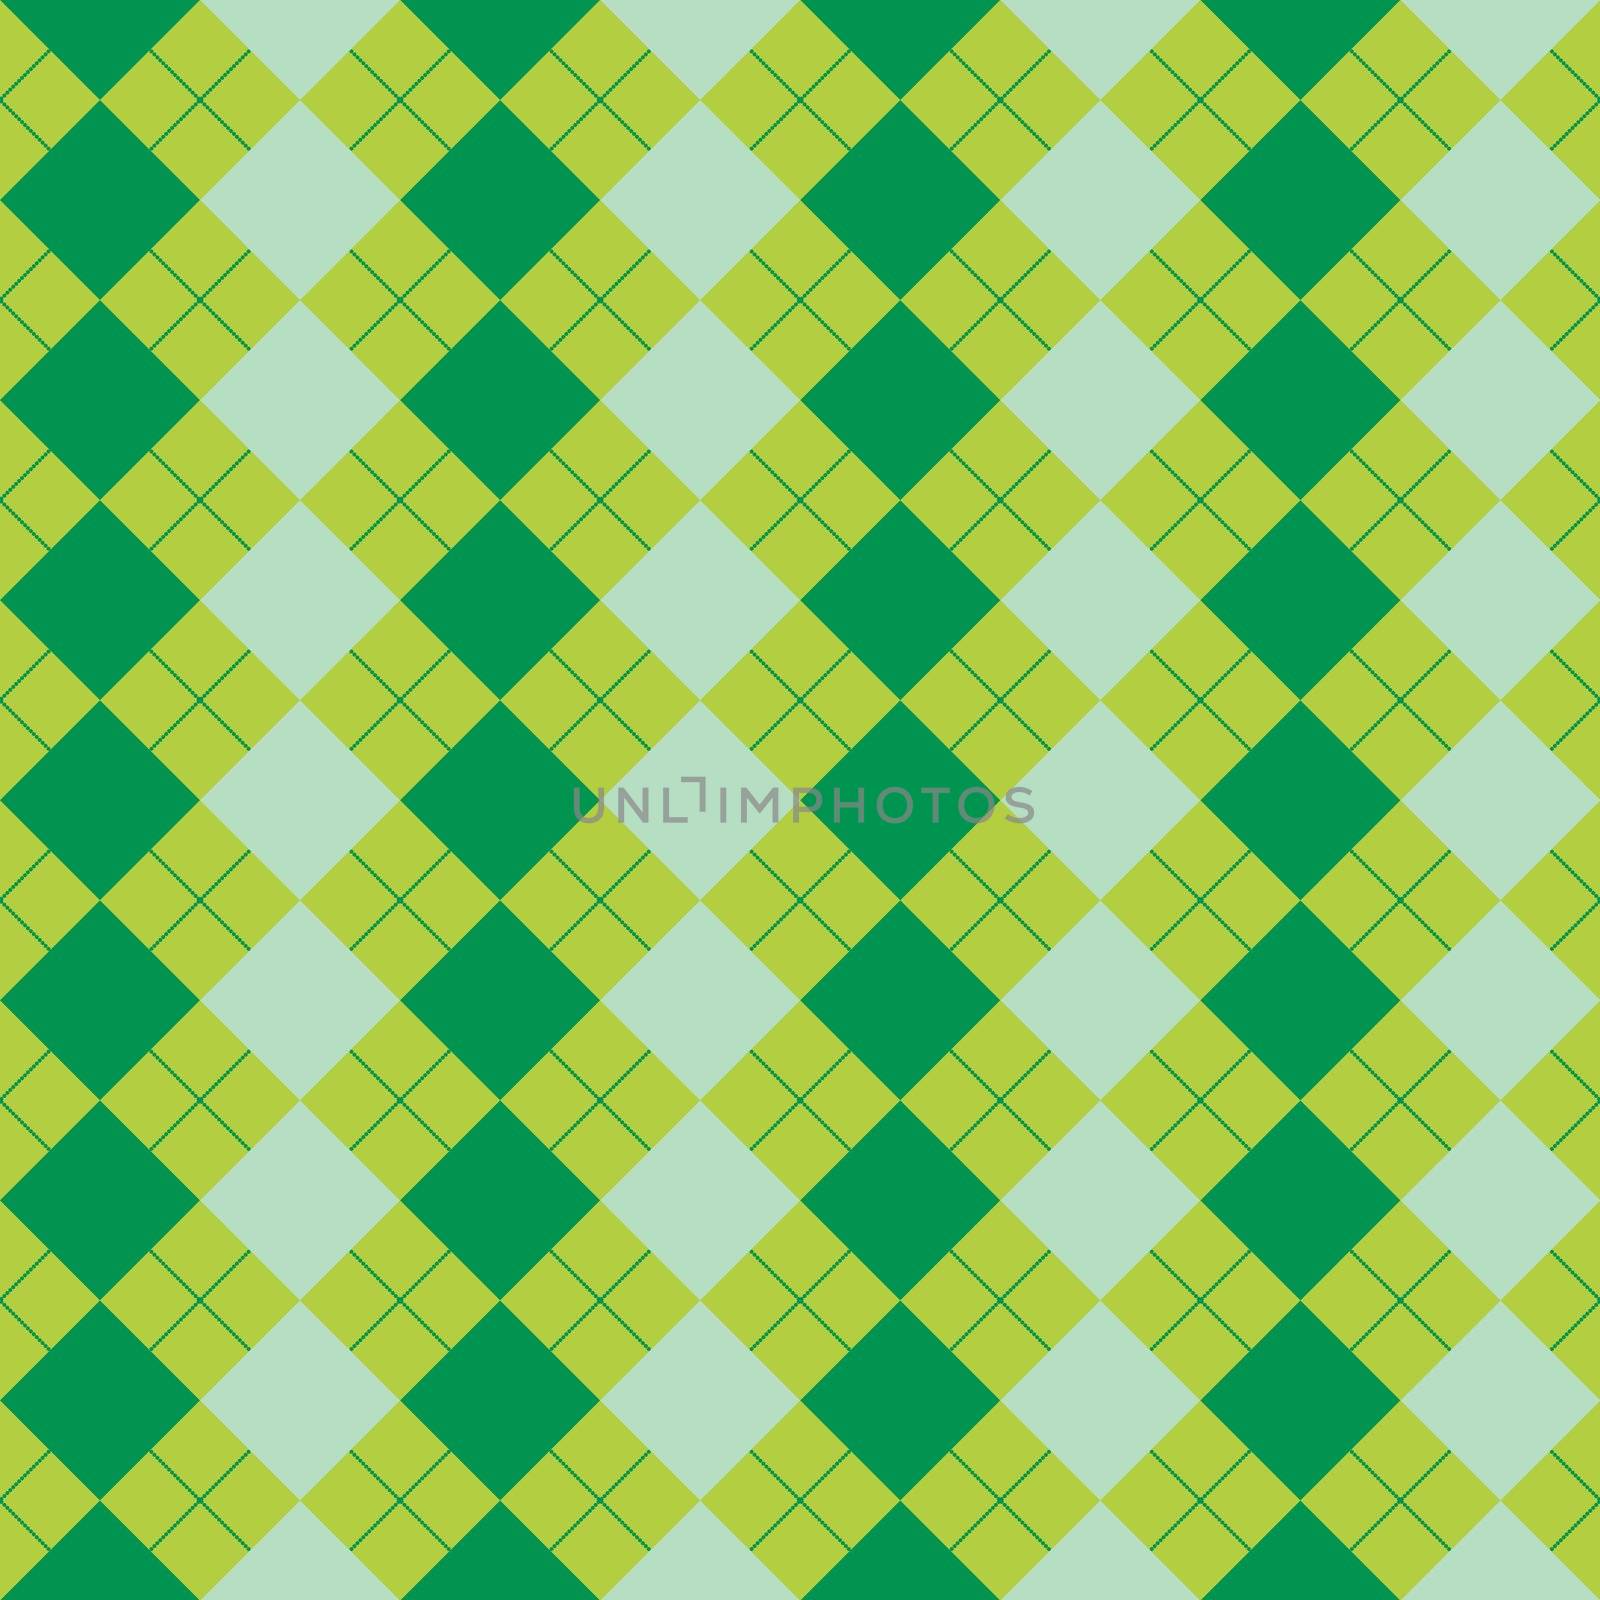 sweater texture mixed green colors, vector art illustration; more textures in my gallery